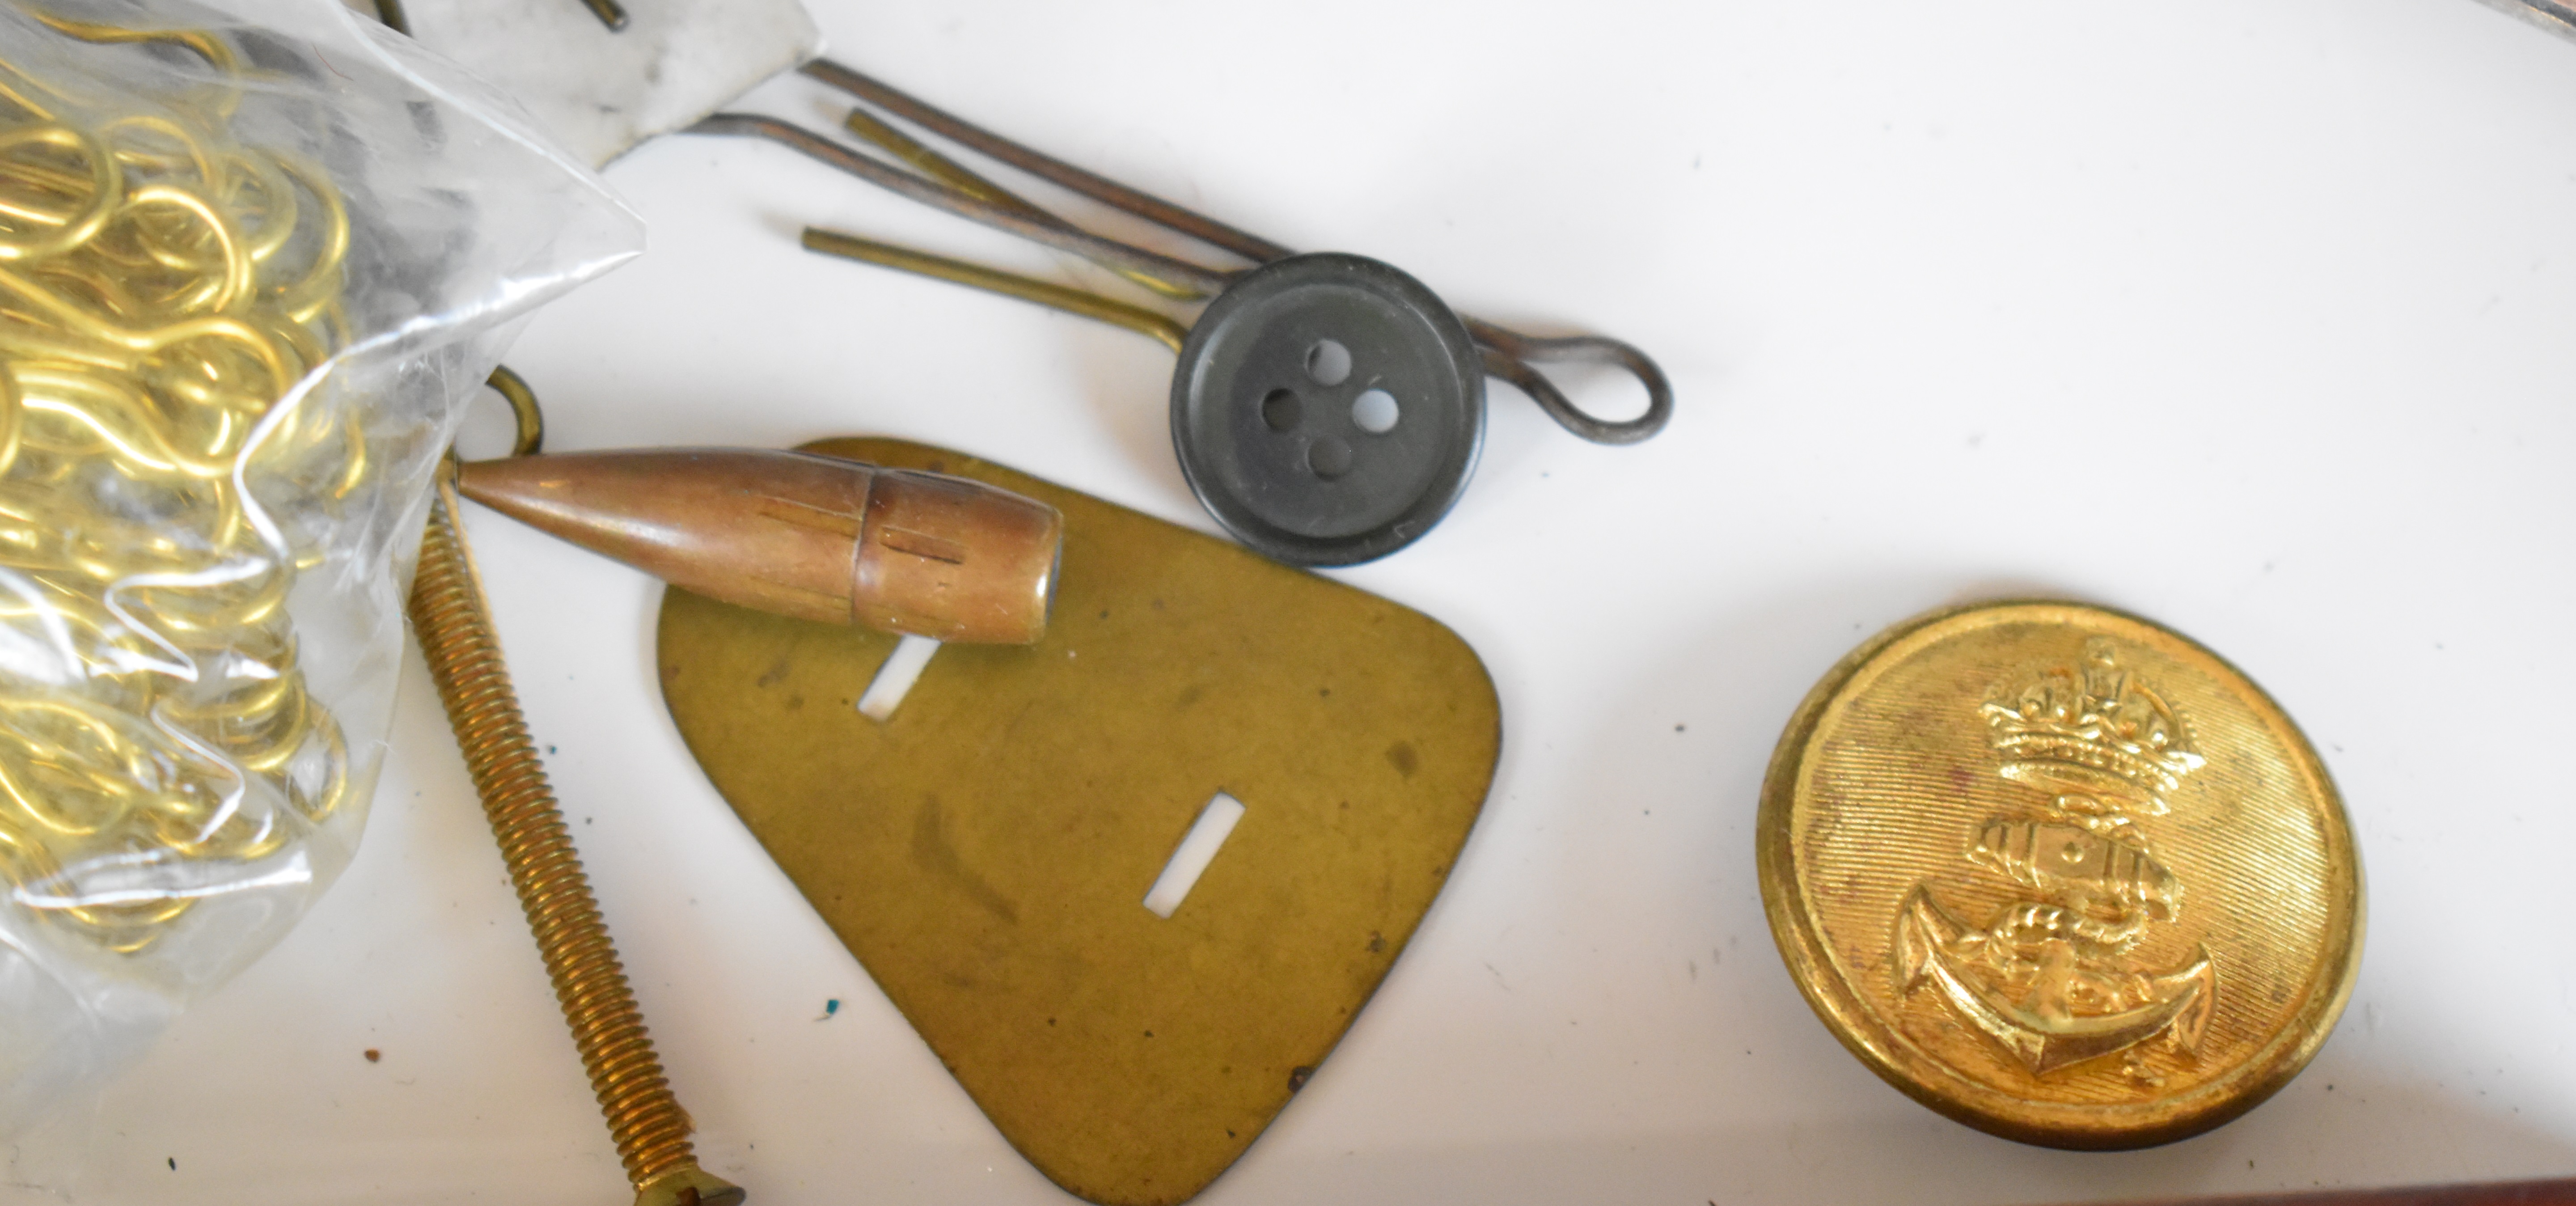 Small collection of militaria related items including kit bag lock and key, trench art knife - Image 10 of 12